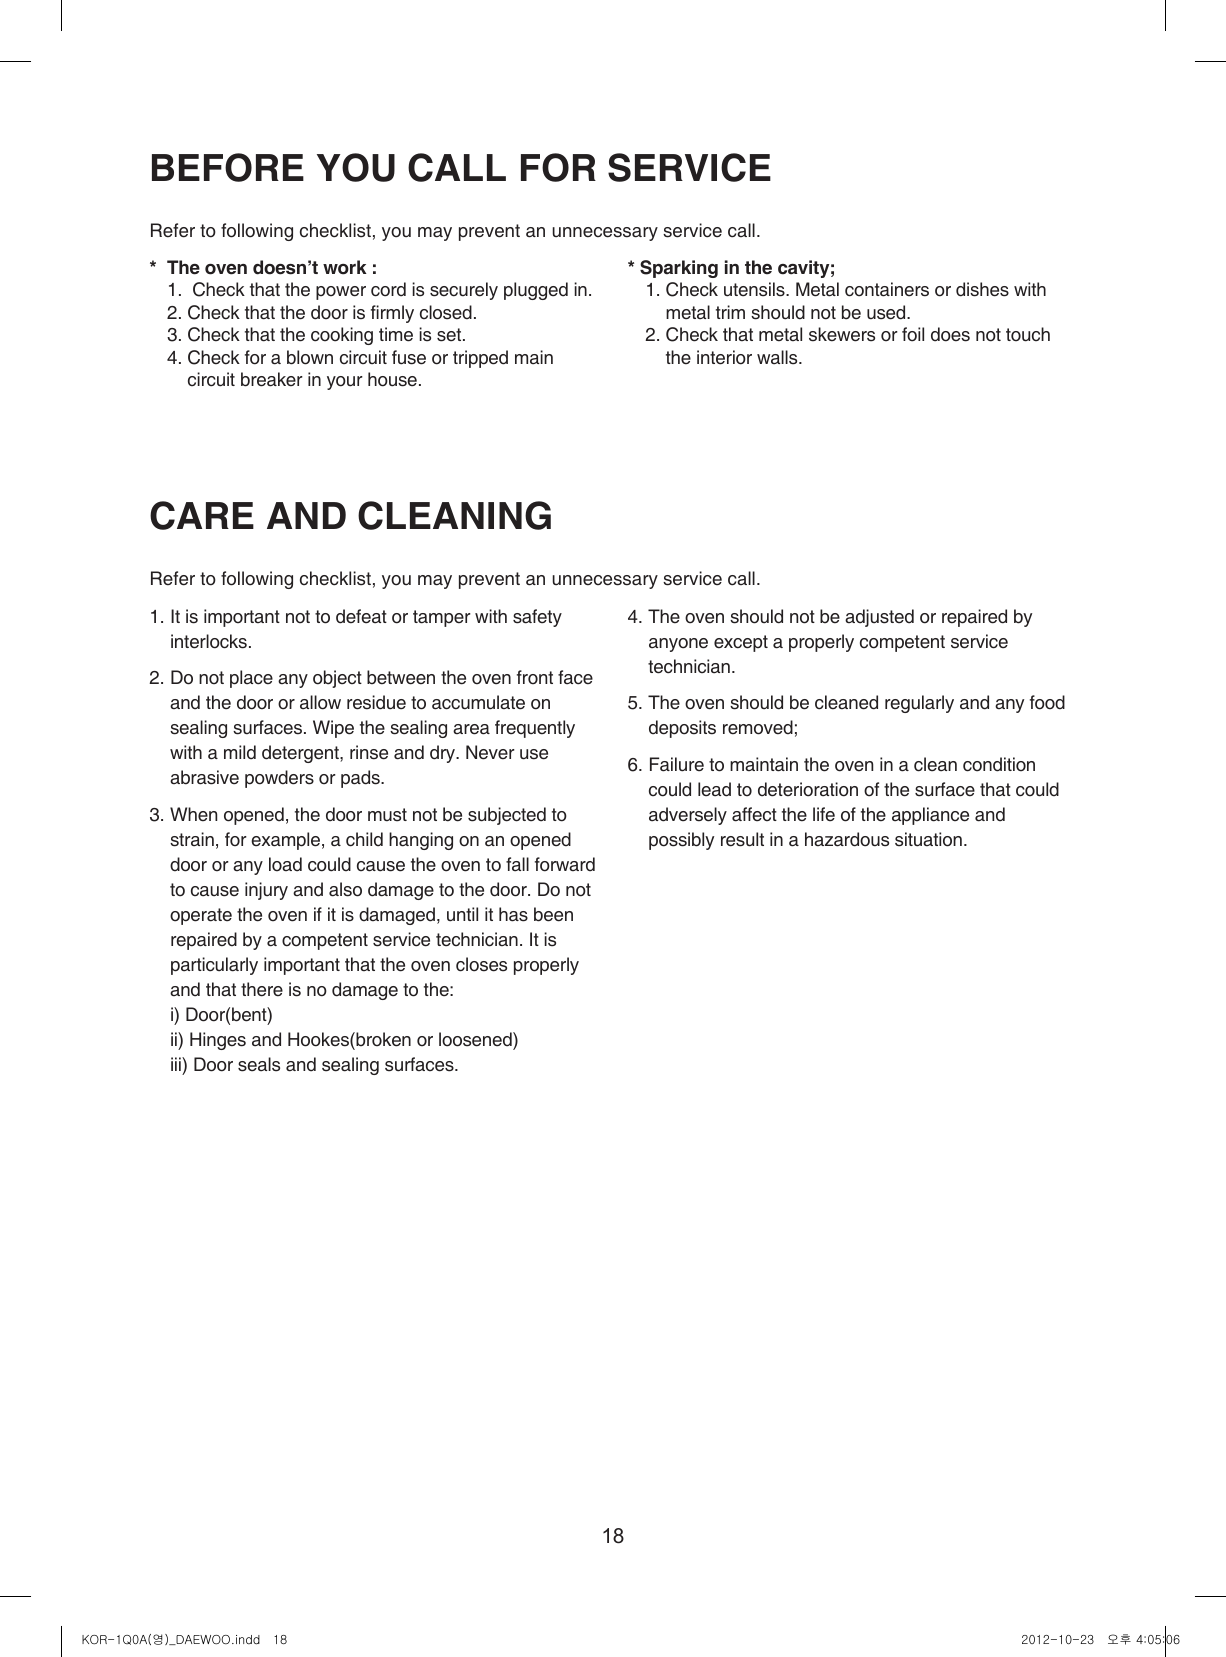 18CARE AND CLEANINGRefer to following checklist, you may prevent an unnecessary service call.  1. It is important not to defeat or tamper with safety interlocks.2. Do not place any object between the oven front face and the door or allow residue to accumulate on sealing surfaces. Wipe the sealing area frequently with a mild detergent, rinse and dry. Never use abrasive powders or pads.3. When opened, the door must not be subjected to strain, for example, a child hanging on an opened door or any load could cause the oven to fall forward to cause injury and also damage to the door. Do not operate the oven if it is damaged, until it has been repaired by a competent service technician. It is particularly important that the oven closes properly and that there is no damage to the:  i) Door(bent)  ii) Hinges and Hookes(broken or loosened)  iii) Door seals and sealing surfaces.4. The oven should not be adjusted or repaired by anyone except a properly competent service technician.5. The oven should be cleaned regularly and any food  deposits removed;6. Failure to maintain the oven in a clean condition could lead to deterioration of the surface that could adversely affect the life of the appliance and possibly result in a hazardous situation.BEFORE YOU CALL FOR SERVICE Refer to following checklist, you may prevent an unnecessary service call.  *  The oven doesn’t work :  1.   Check that the power cord is securely plugged in.  2. Check that the door is firmly closed.  3. Check that the cooking time is set.  4.  Check for a blown circuit fuse or tripped main circuit breaker in your house.* Sparking in the cavity;  1.  Check utensils. Metal containers or dishes with metal trim should not be used.  2.  Check that metal skewers or foil does not touch the interior walls.KOR-1Q0A(영)_DAEWOO.indd   18 2012-10-23   오후 4:05:06